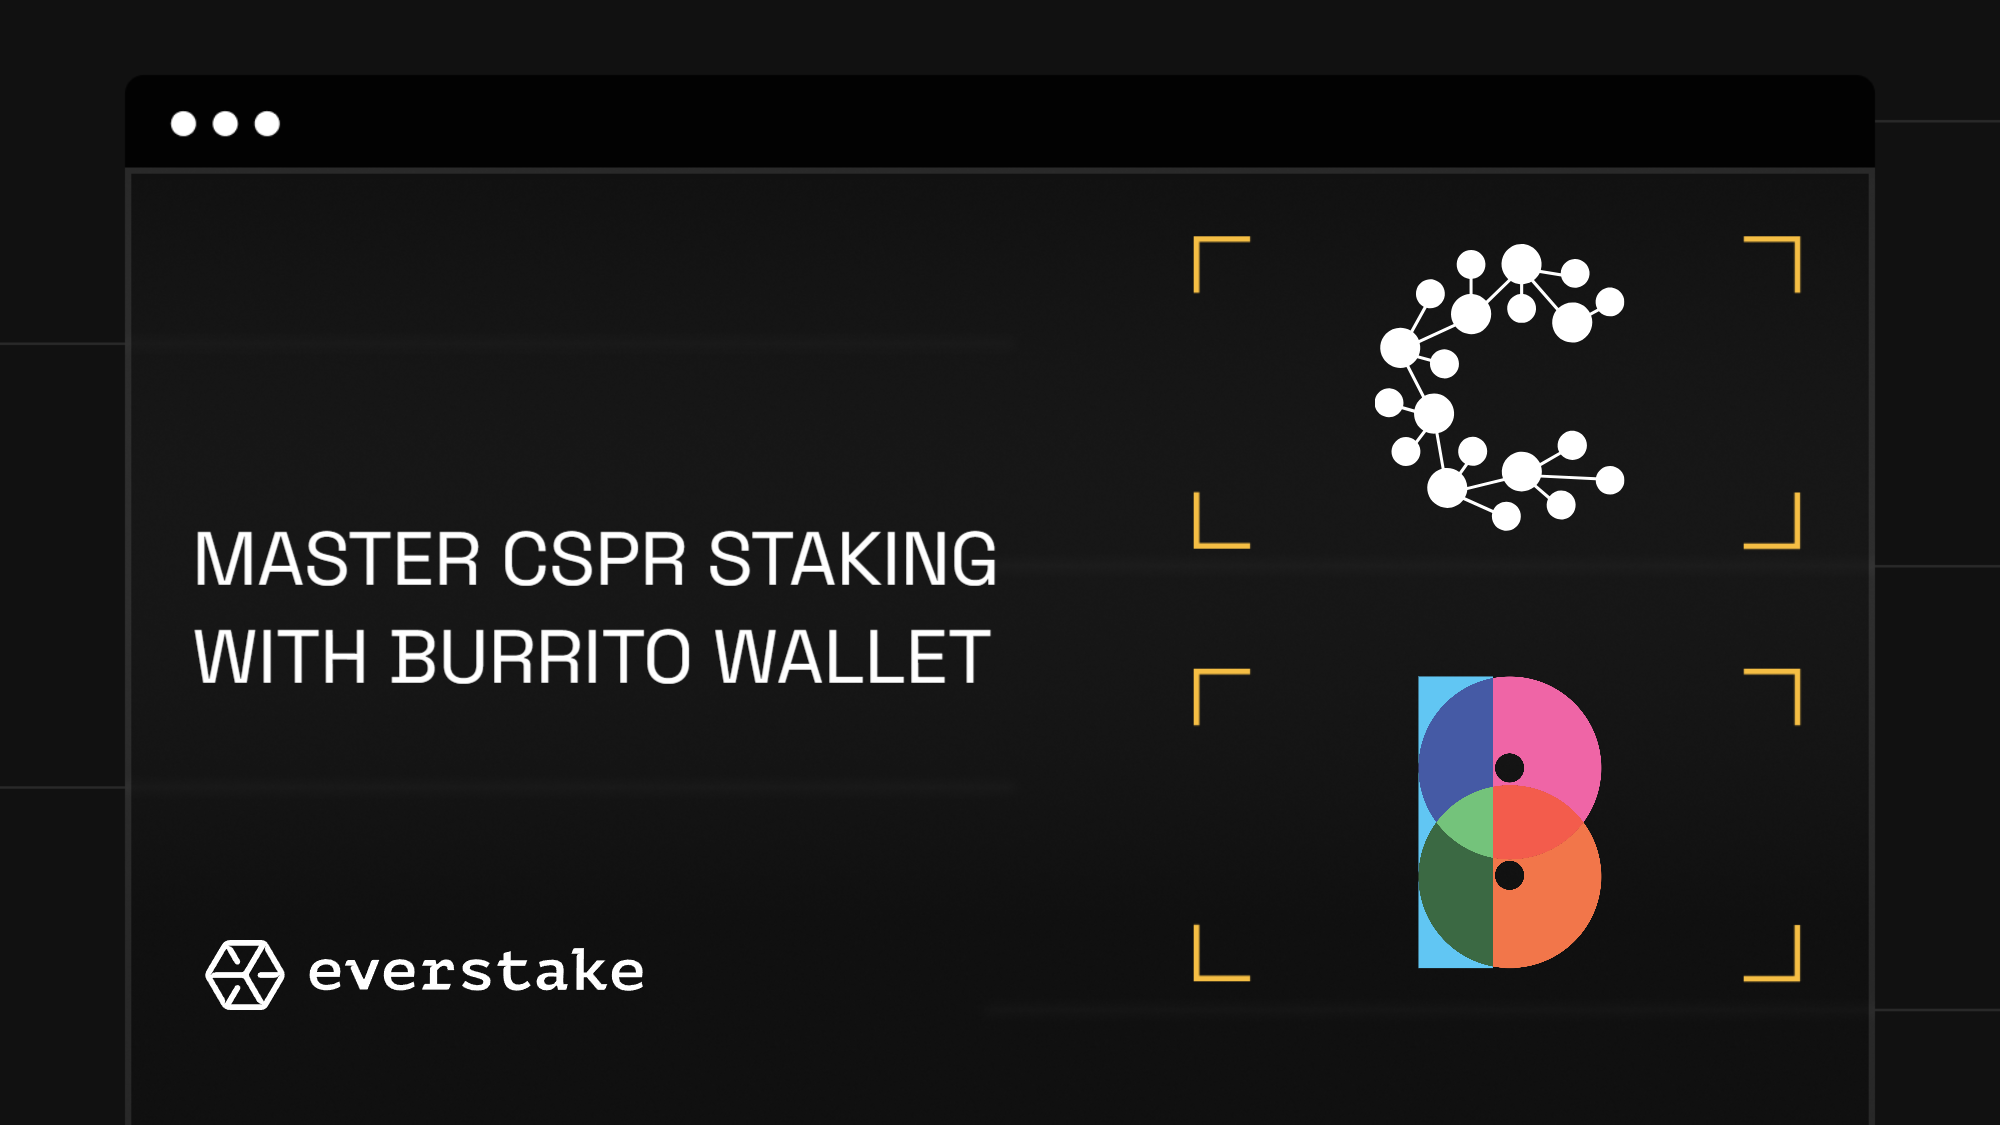 How to stake CSPR using Burrito Wallet